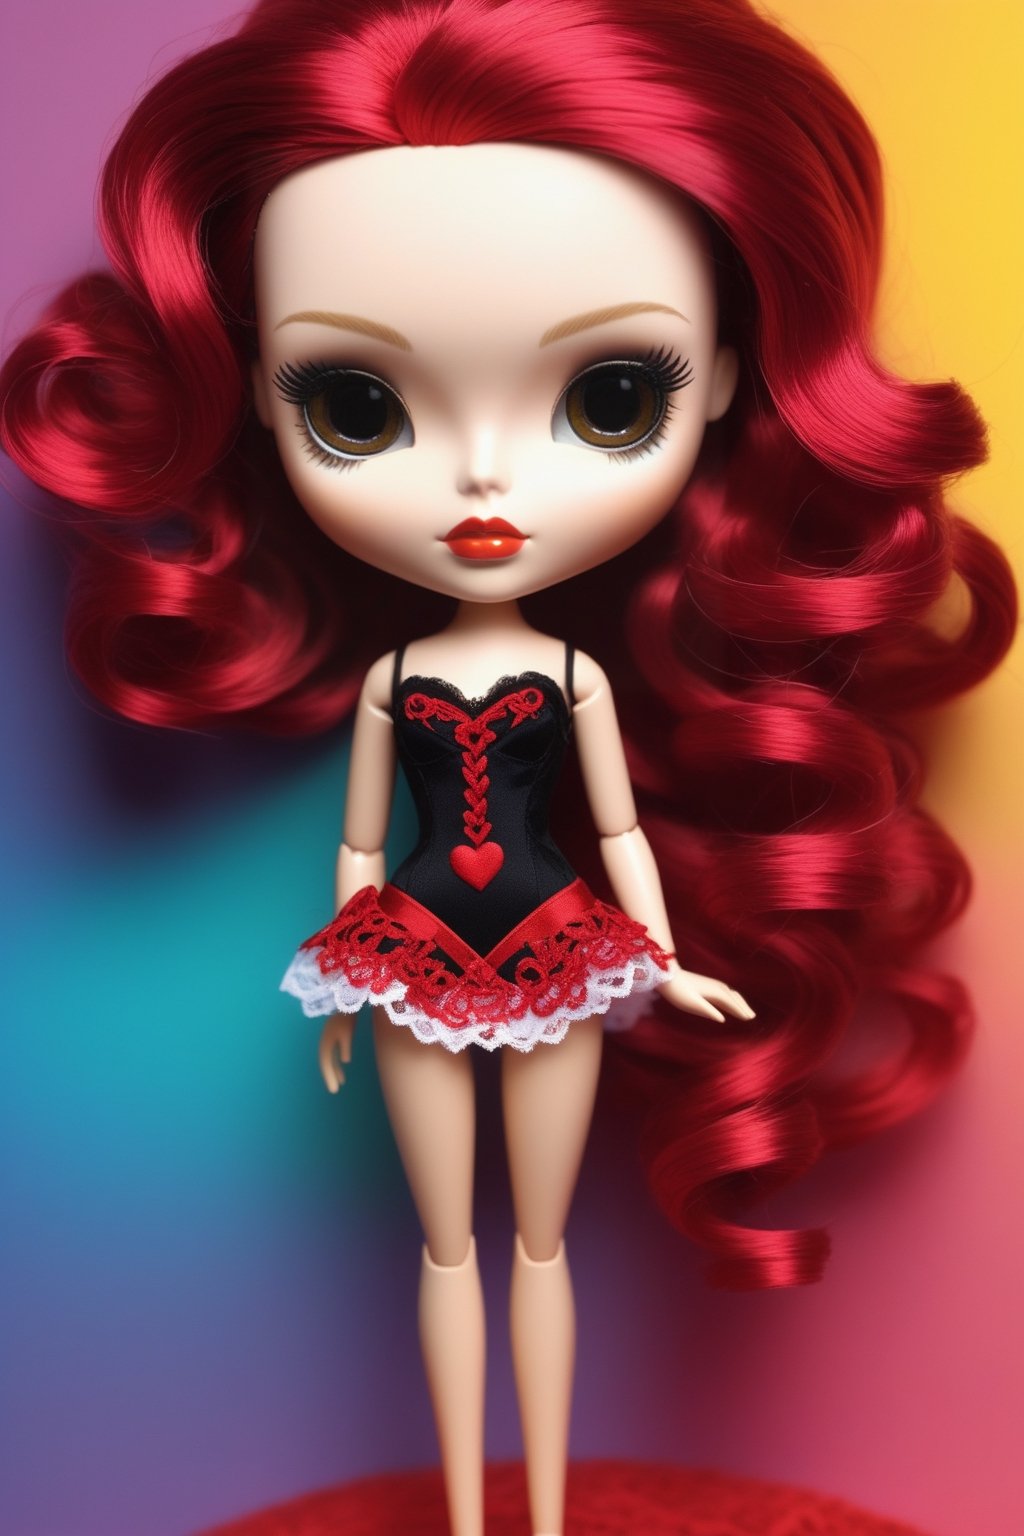 (realistic:1.3) Blythe doll, Haute couture, no particular features, of high fashion embroidery and lace swimwear, (long shot: 1.2) (frutiger style:1.3), (colorful:1.3), (2004 aesthetics:1.2).  swirls, heart \(symbol\), (gradient background:1.3) (dinamic pose: 1.3). Saturated colors, tonal transitions, detailed, minimalistic, concept art, intricate detail, World character design, high-energy, concept art, Masterpiece,iconic, PoP art,more detail XL, intricate colors blend, photorealism,leonardo,artint,sweetscape,ink 